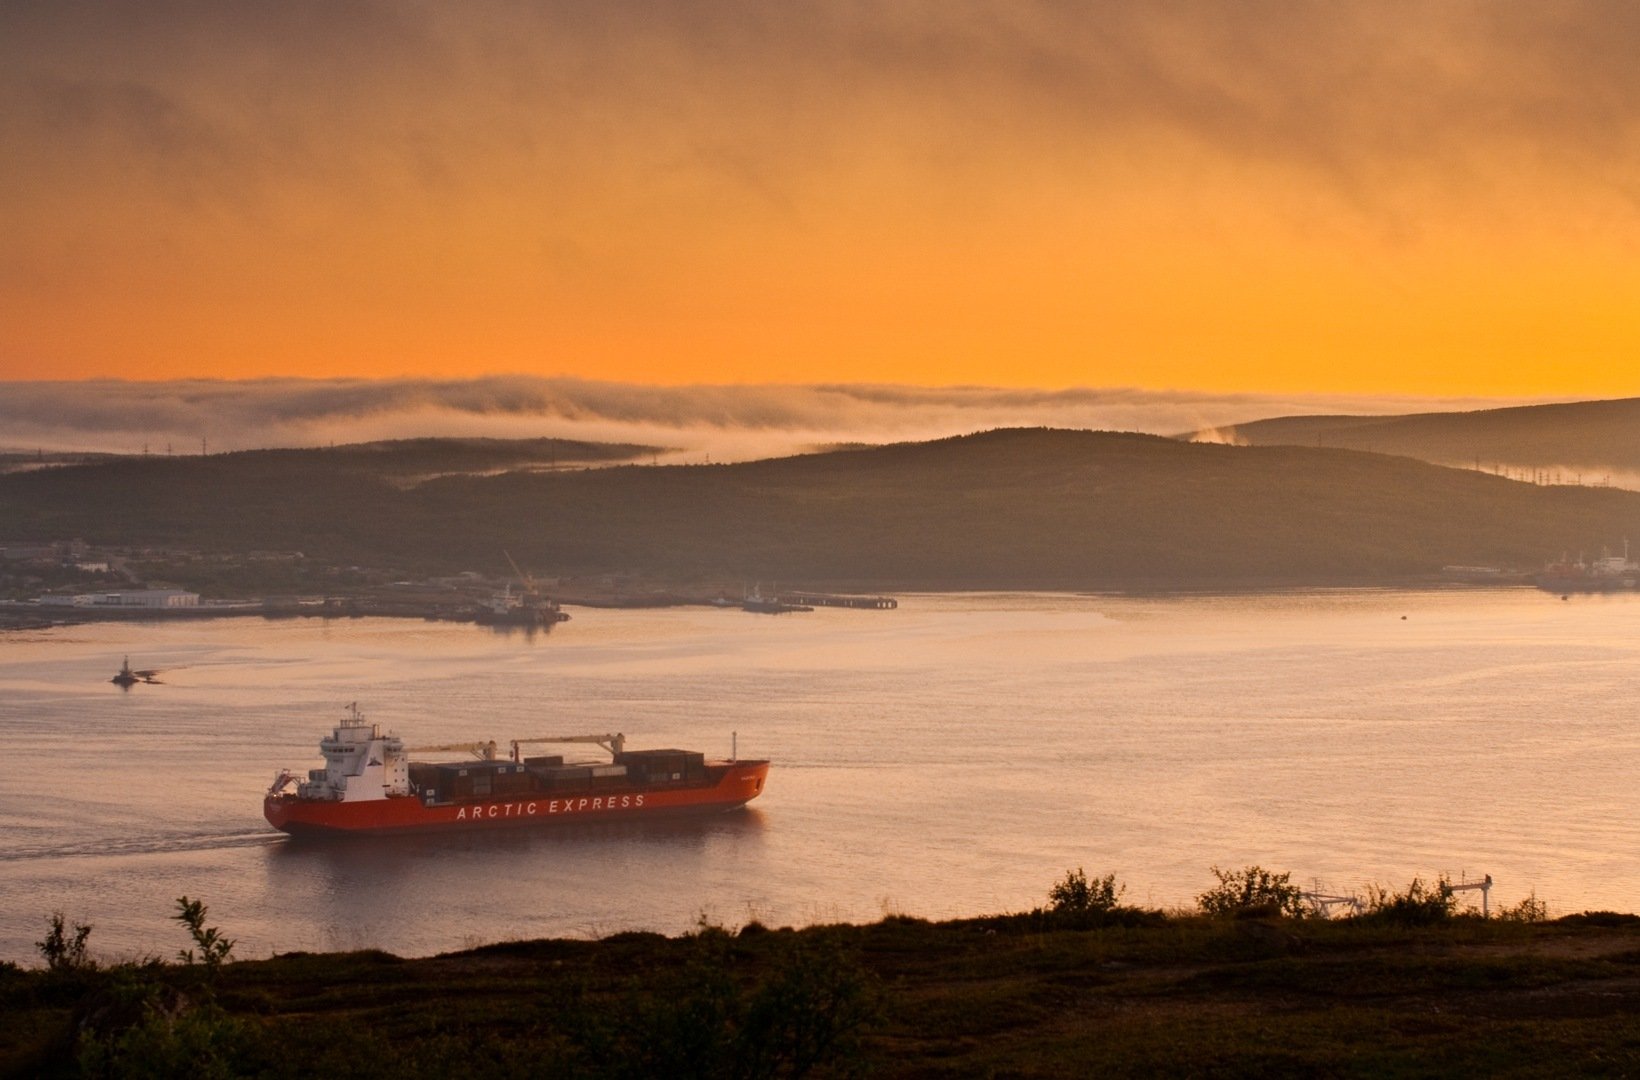 A container ship outside Murmansk. (c) Tom Thiel.